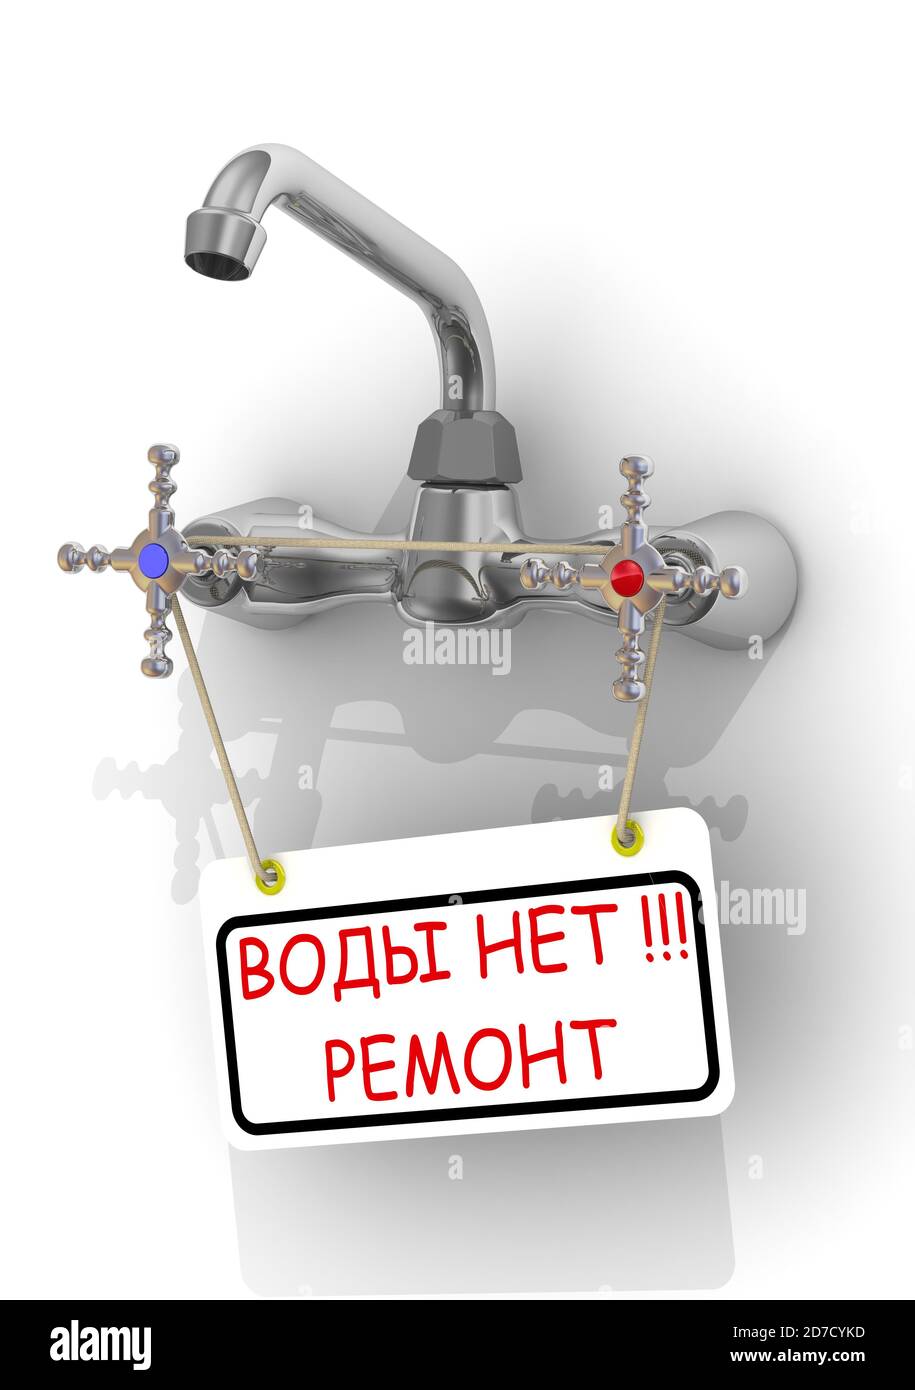 Repair of water supply. Faucet with an information sign labeled NO WATER!!! REPAIRS in Russian language. 3D illustration Stock Photo